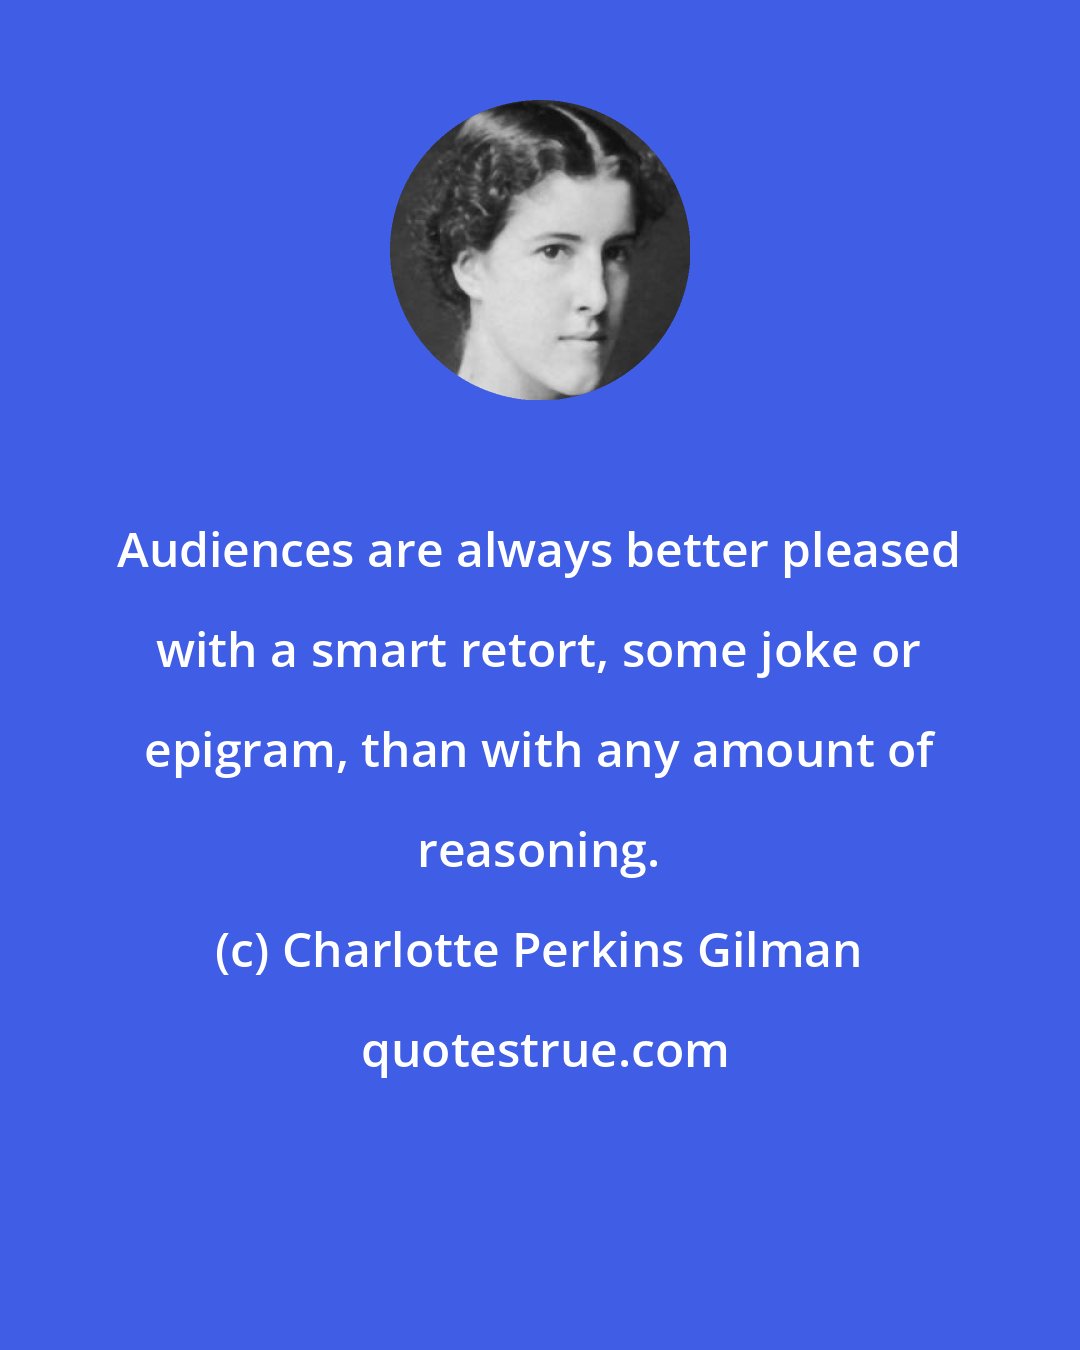 Charlotte Perkins Gilman: Audiences are always better pleased with a smart retort, some joke or epigram, than with any amount of reasoning.